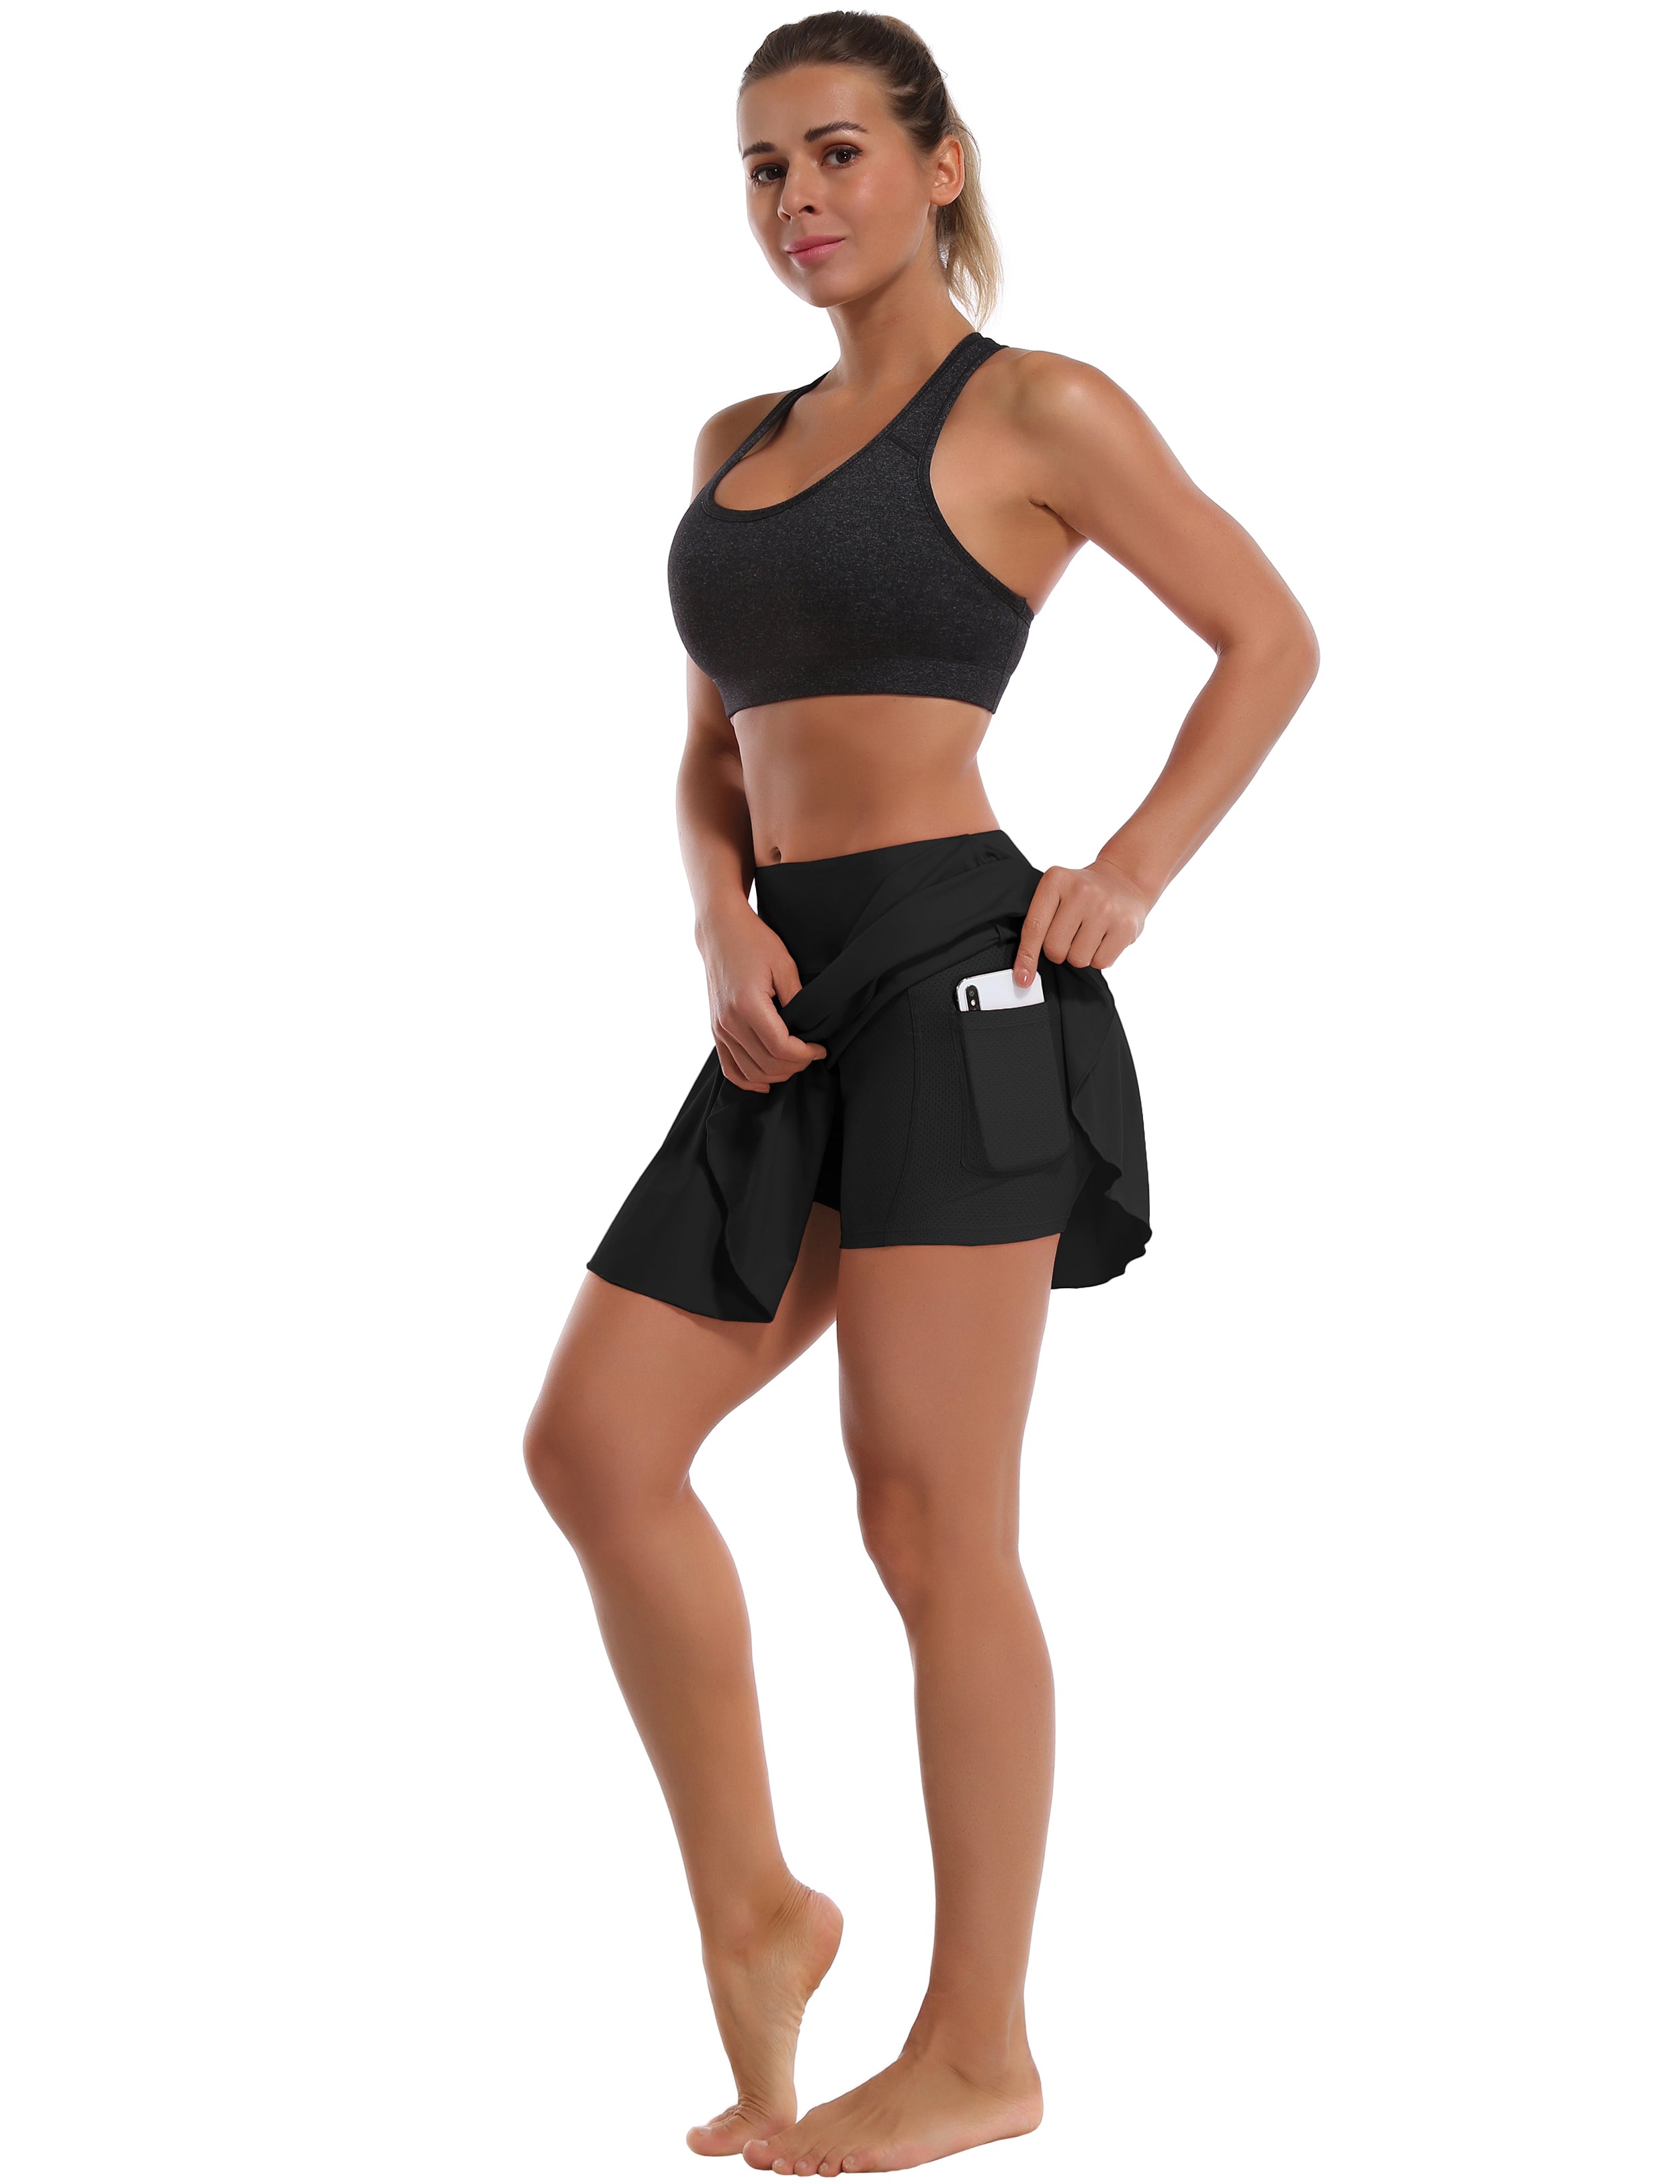 Athletic Tennis Golf Pleated Skort Awith Pocket Shorts black 80%Nylon/20%Spandex UPF 50+ sun protection Elastic closure Lightweight, Wrinkle Moisture wicking Quick drying Secure & comfortable two layer Hidden pocket